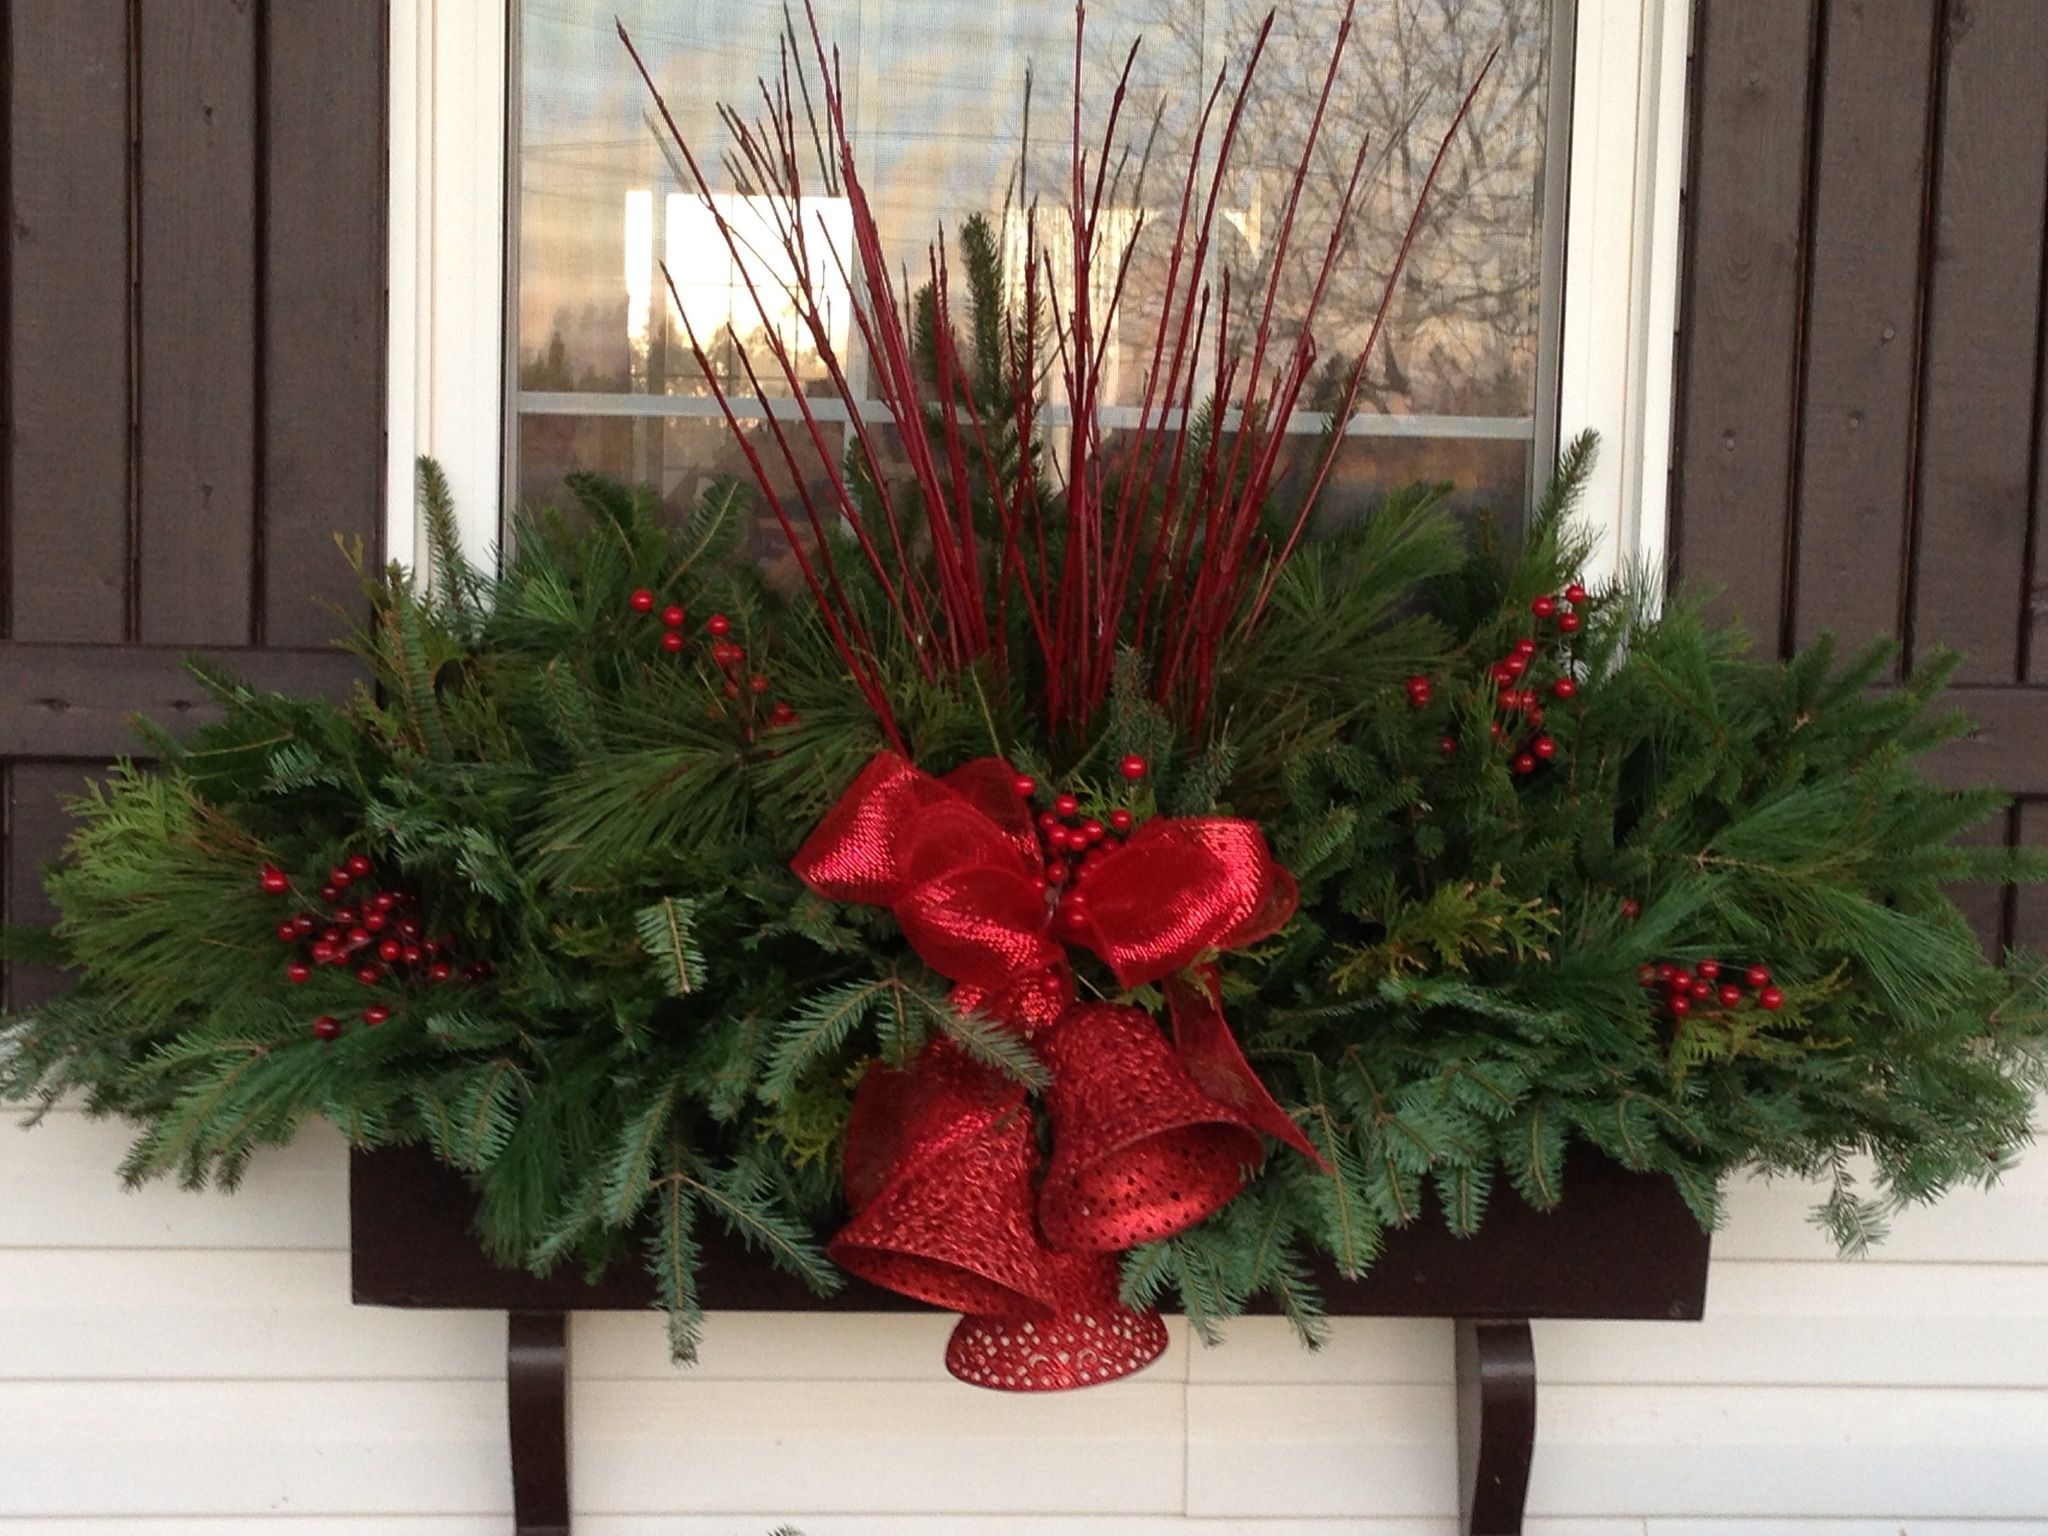 How To Fill Outdoor Planters With Fresh Greens For The Holidays